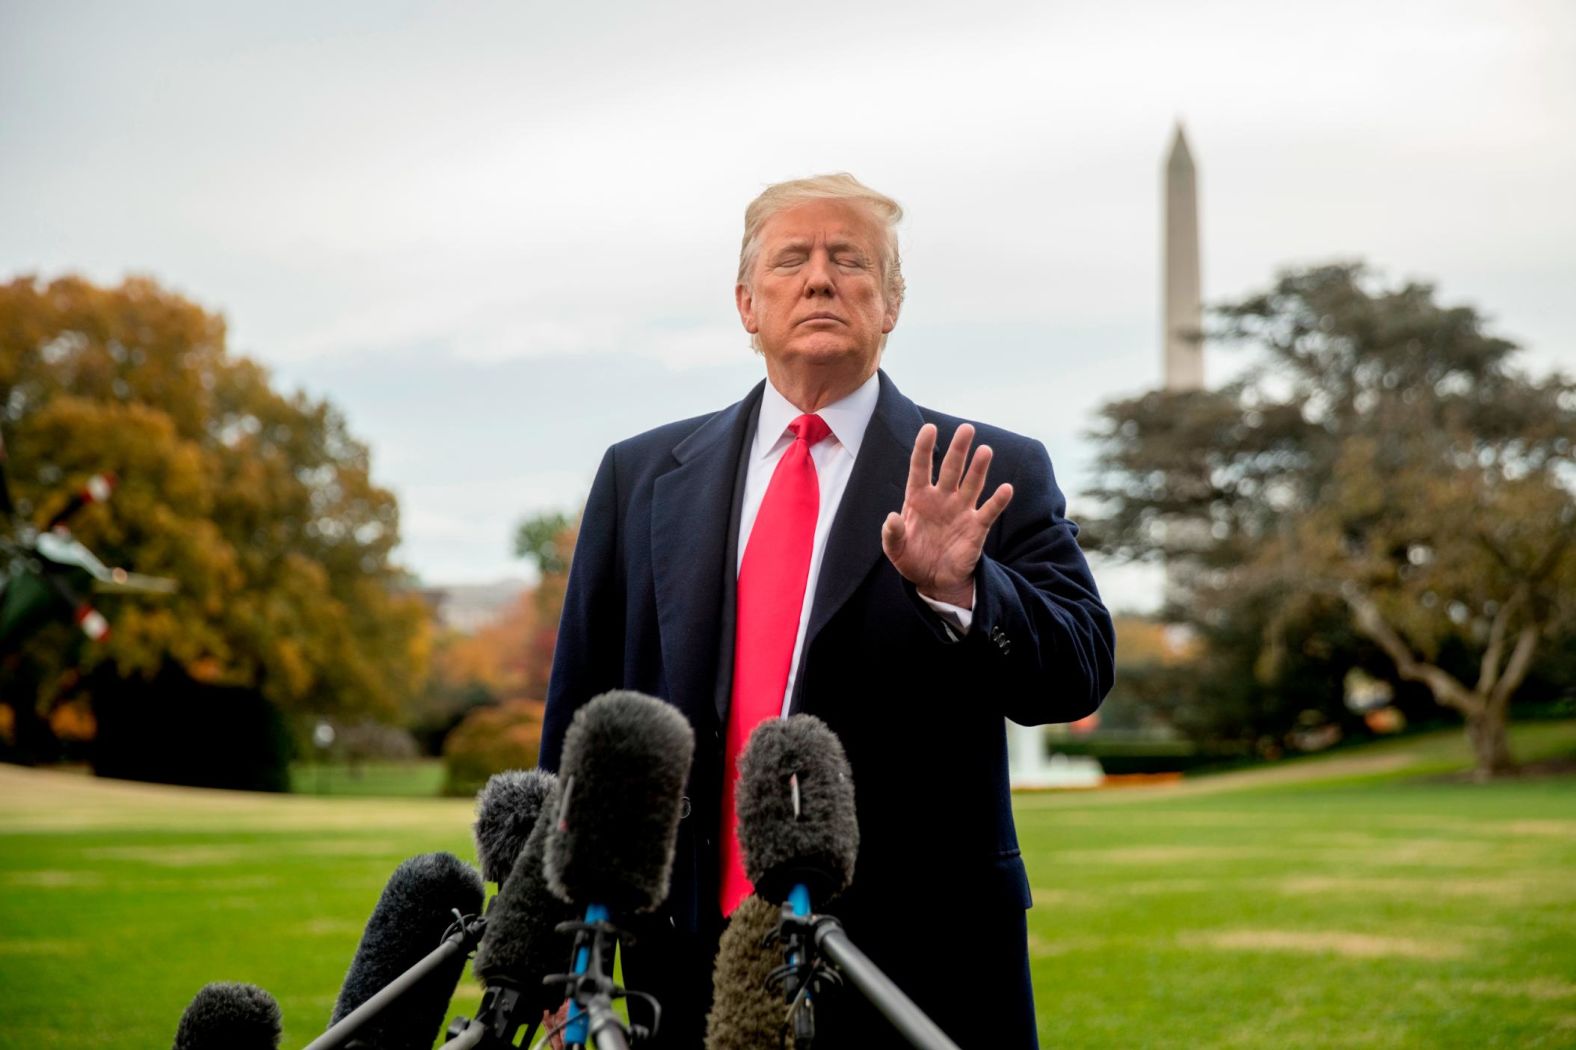 Trump waves off a reporter's question as he speaks to members of the media on the South Lawn of the White House before boarding Marine One on November 2. "What you don't see in this image are the throngs of cameramen, sound crews, photographers, reporters, Secret Service agents and White House aides all packed in together behind ropes," photographer Andrew Harnik said. "What you don't hear is the defining sound from the helicopter and dozens of reporters all shouting at the top of their lungs to be heard and get their questions answered by the President. ... Though the image was made in a loud raucous environment, the resulting image has a quiet power to it -- with his eyes closed and the wave of his hand, Trump silences a reporter's question."